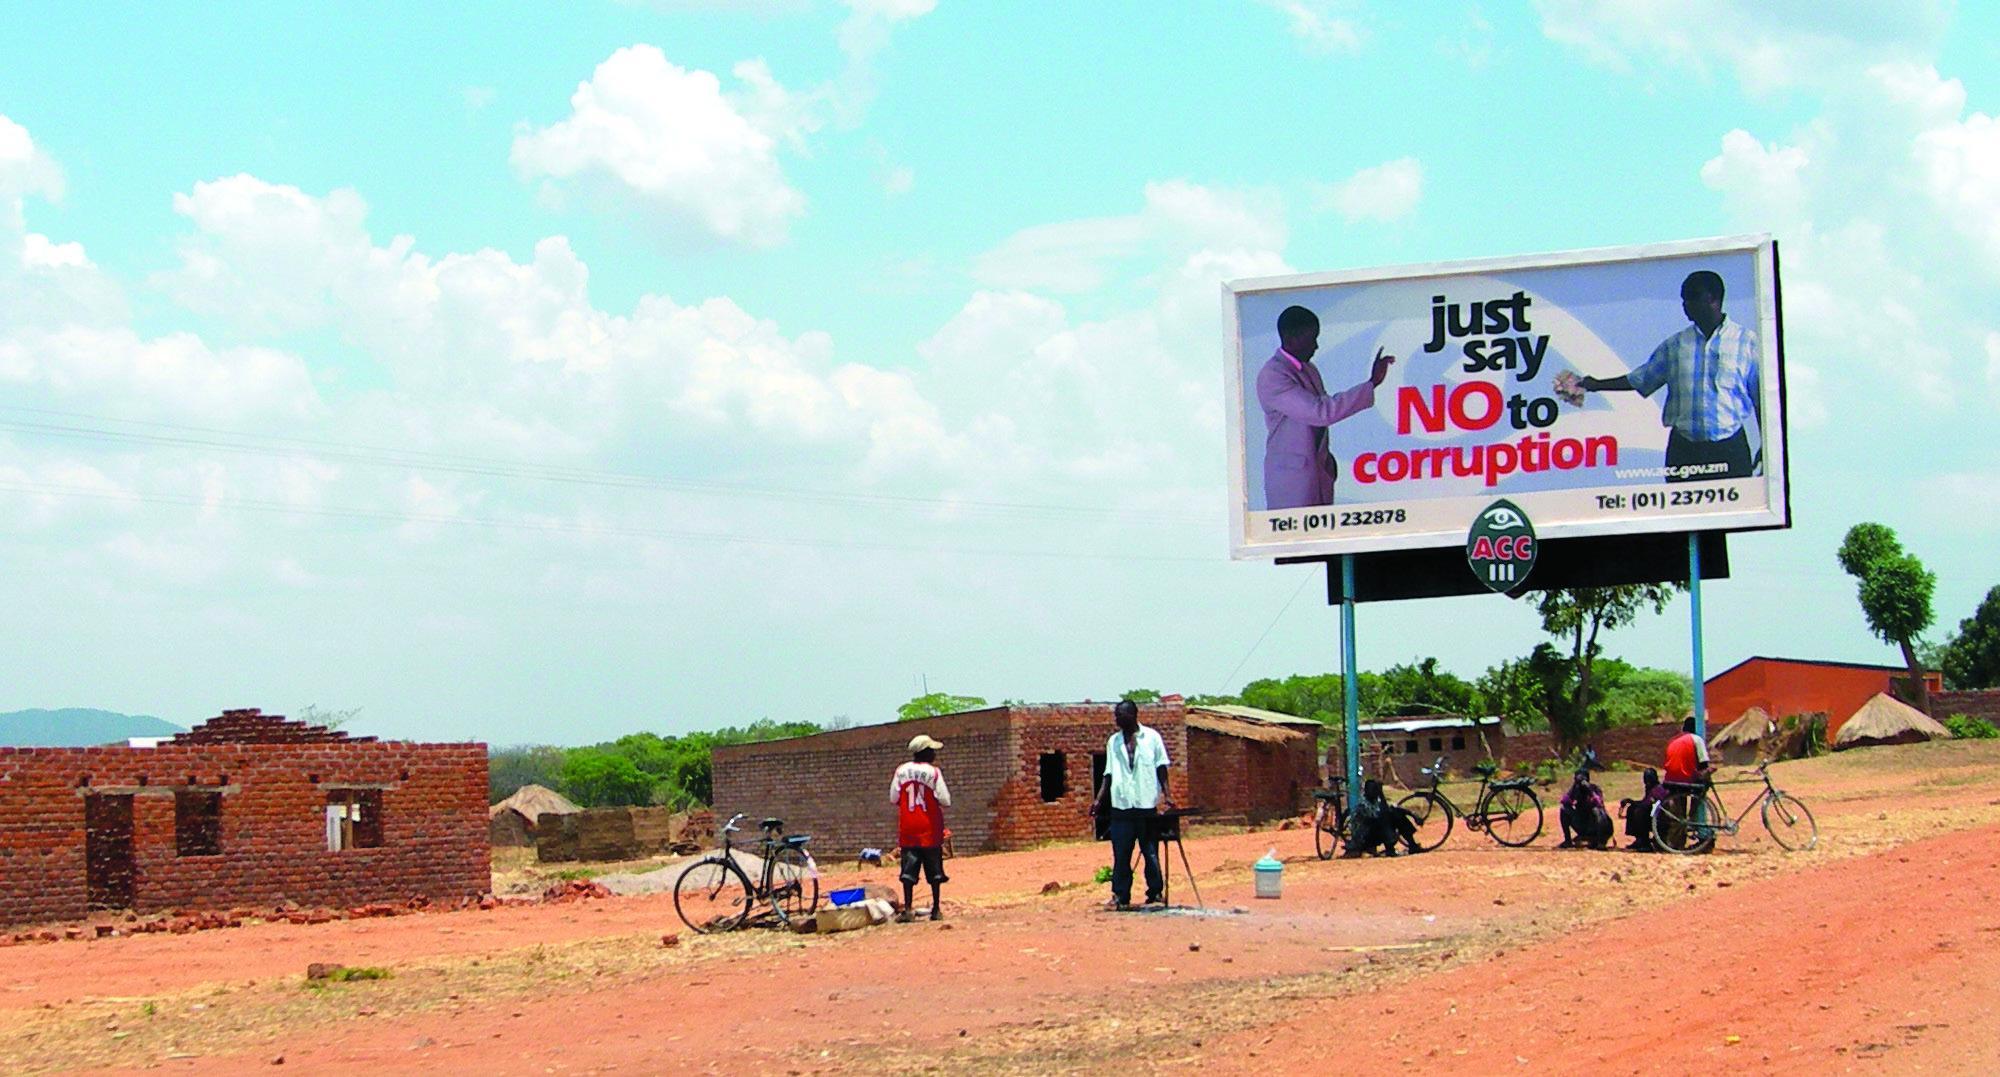 A billboard in Zambia exhorting the public to “Just say no to corruption.” Photo Source: Wikipedia.org